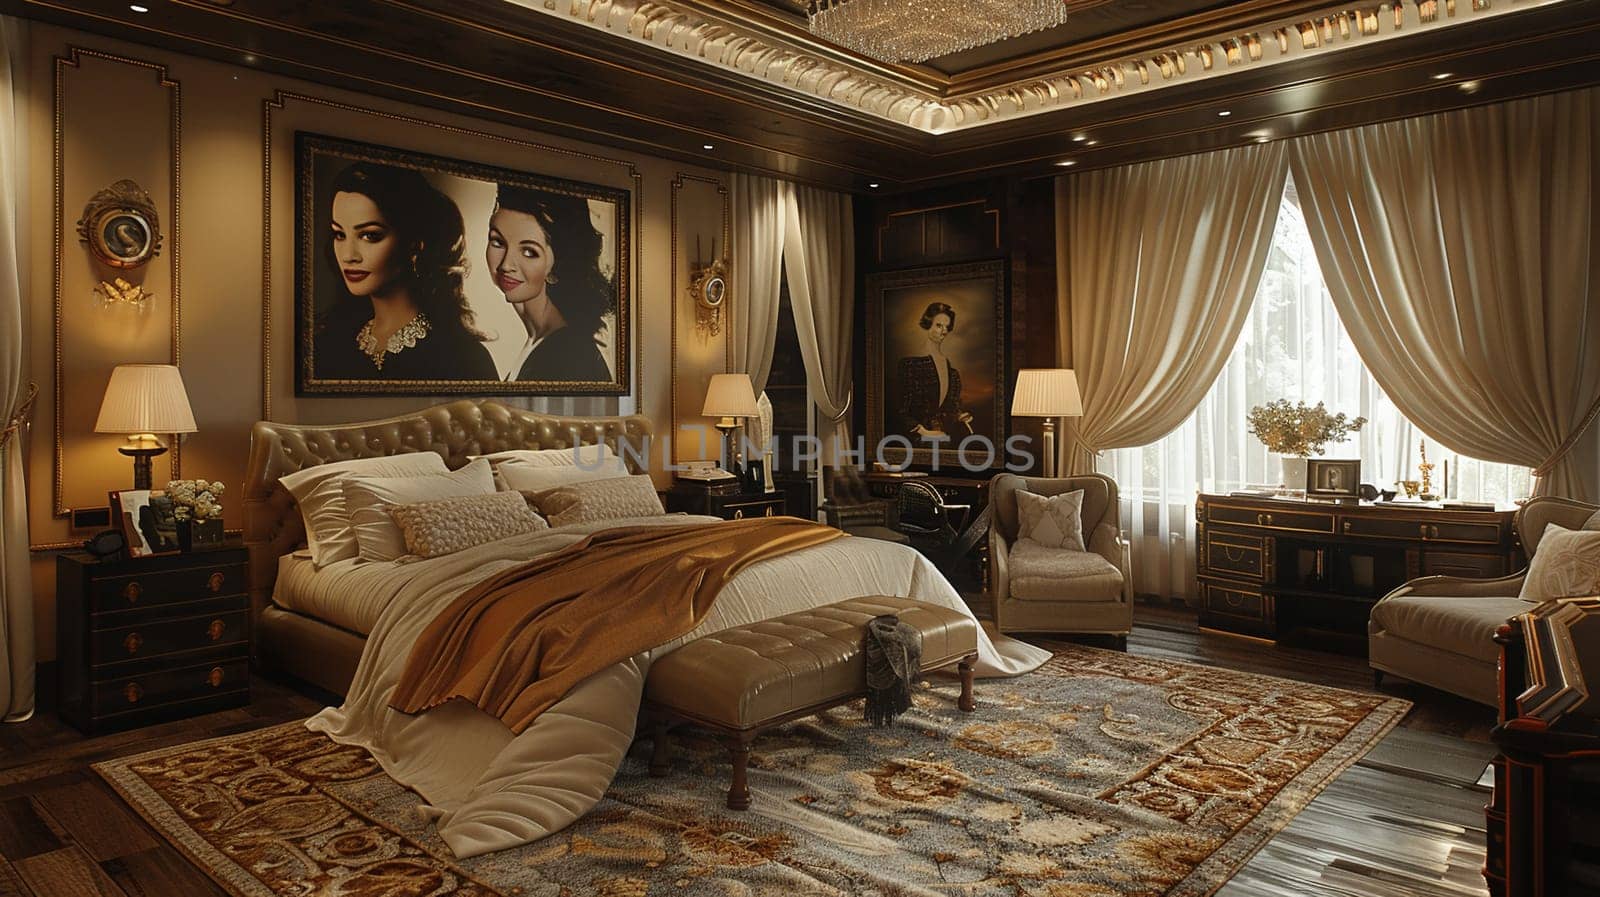 Old Hollywood glamour bedroom with satin drapes and vintage portraits